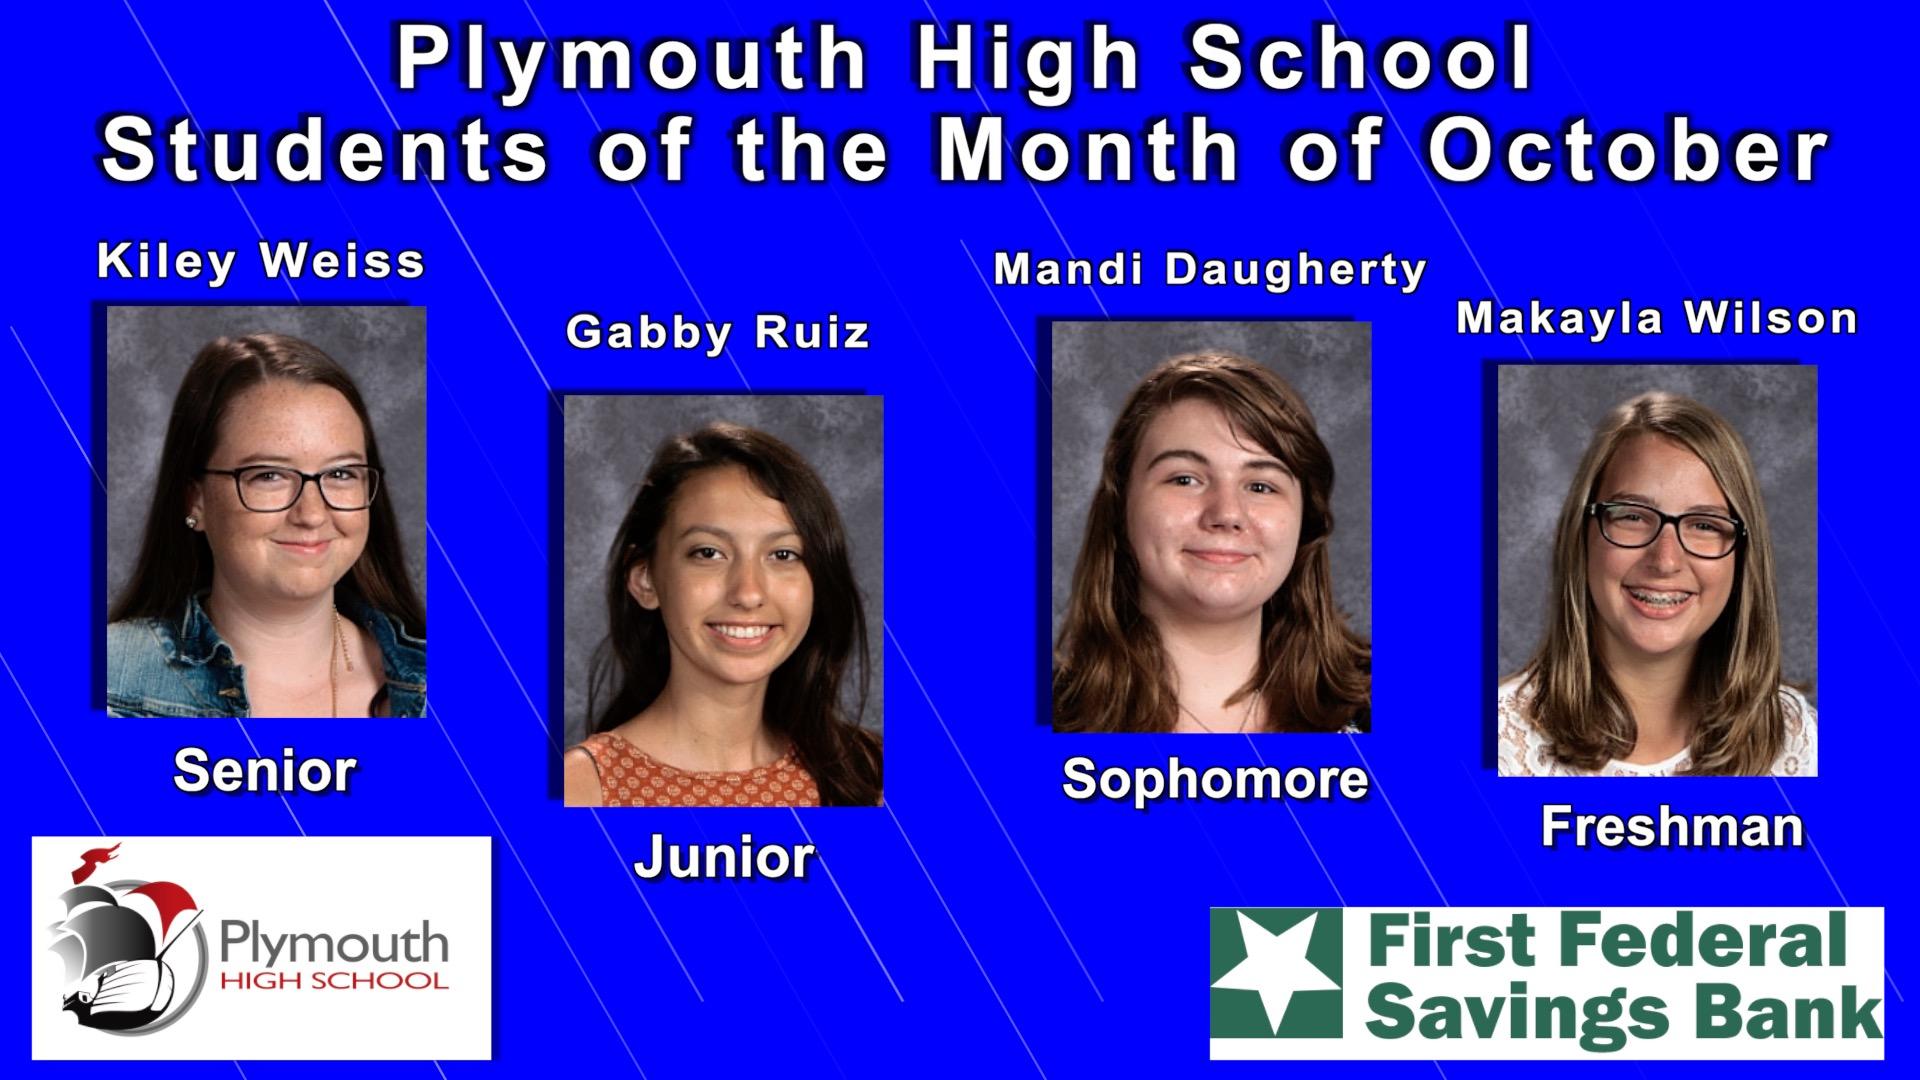 Plymouth High School First Federal Savings Bank Students of the Month of October 